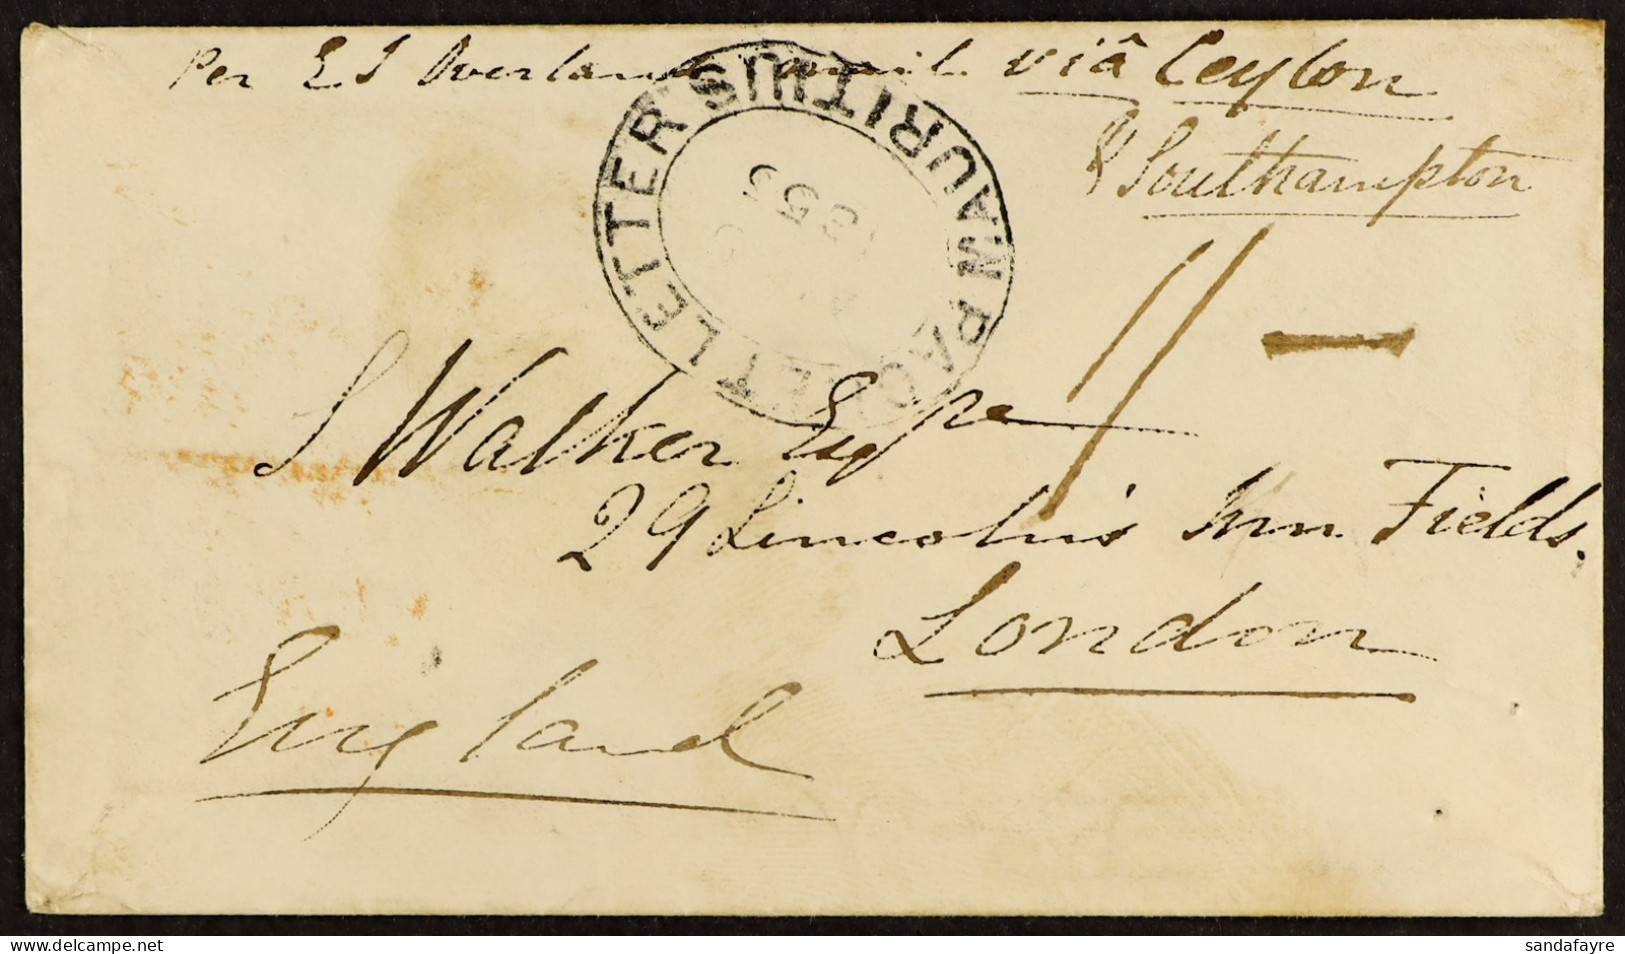 STAMP - 1855 (5th Aug) Envelope From Port Louis, MAURITIUS, To London Via Galle And Southampton, Directed â€˜via Ceylon  - ...-1840 Vorläufer